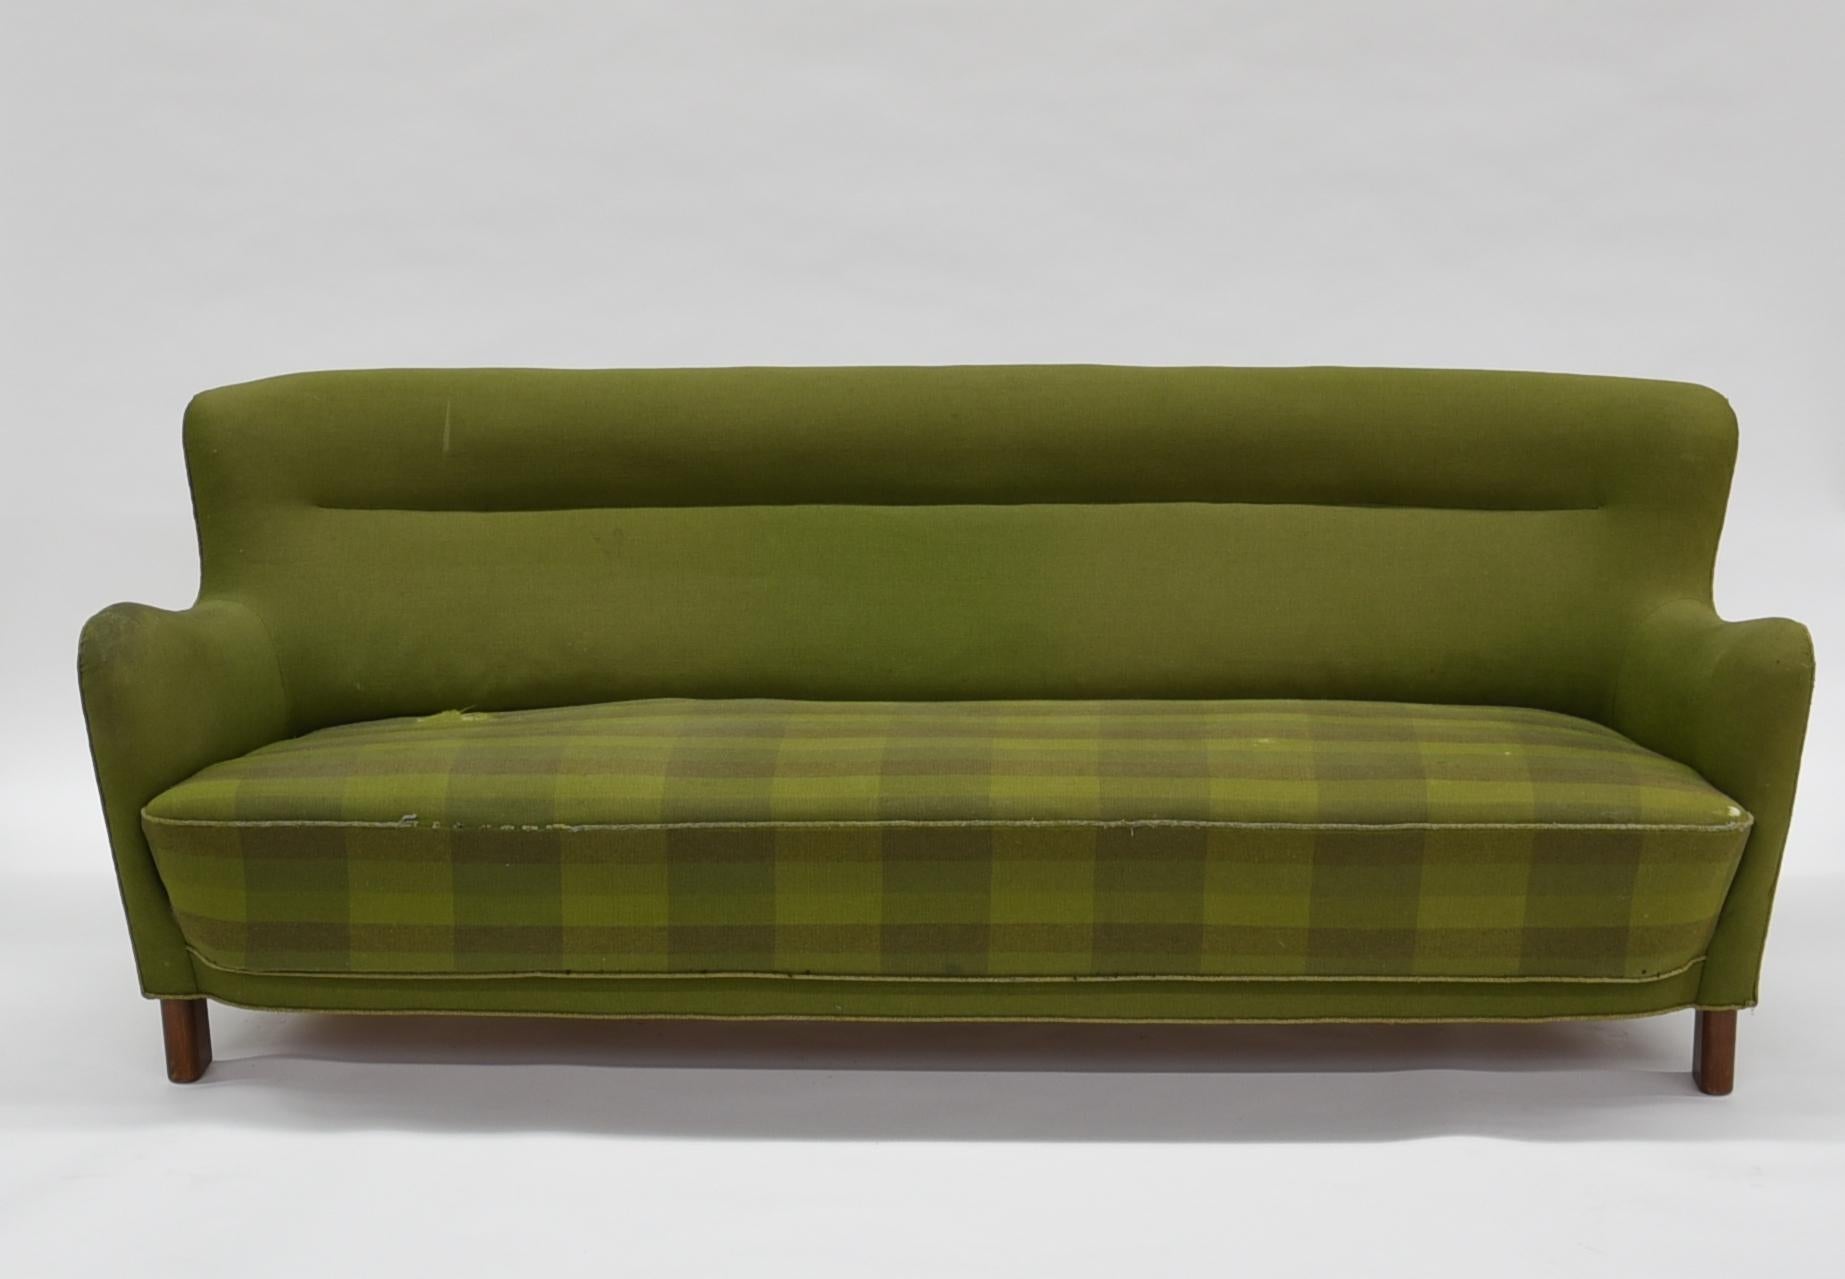 Three-seat sofa by Fritz Hansen, Model 1669a/4468.
Oval, stained beech legs. Seat, sides and back upholstered in wool.
Literature: Catalogue from Fritz Hansen 1942, p. 17.
Catalogue from Fritz Hansen 1951, p. 74.